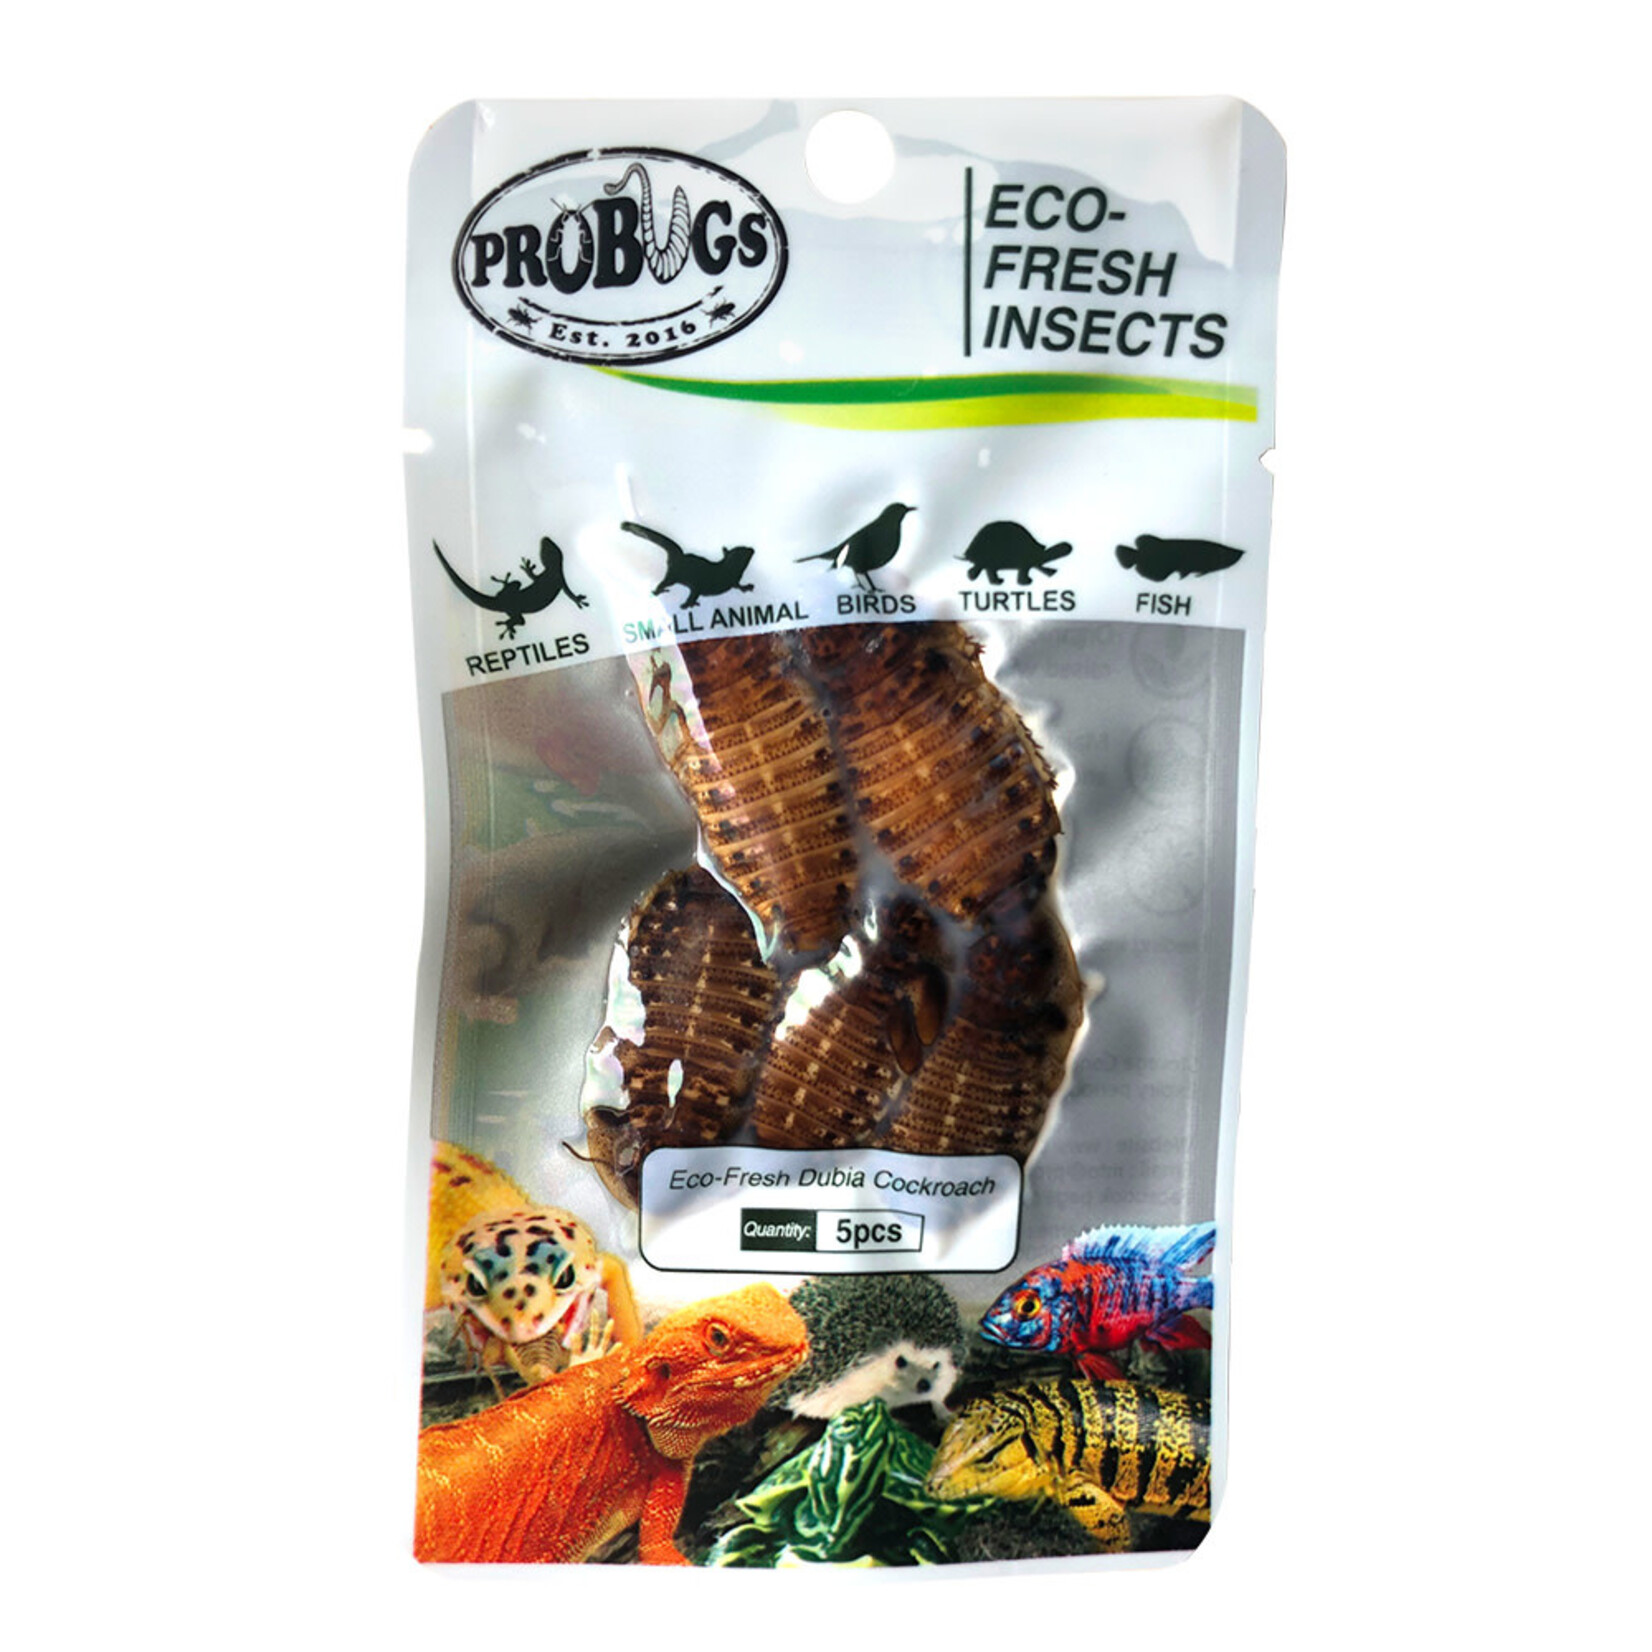 Probugs Dubia Cockroach package